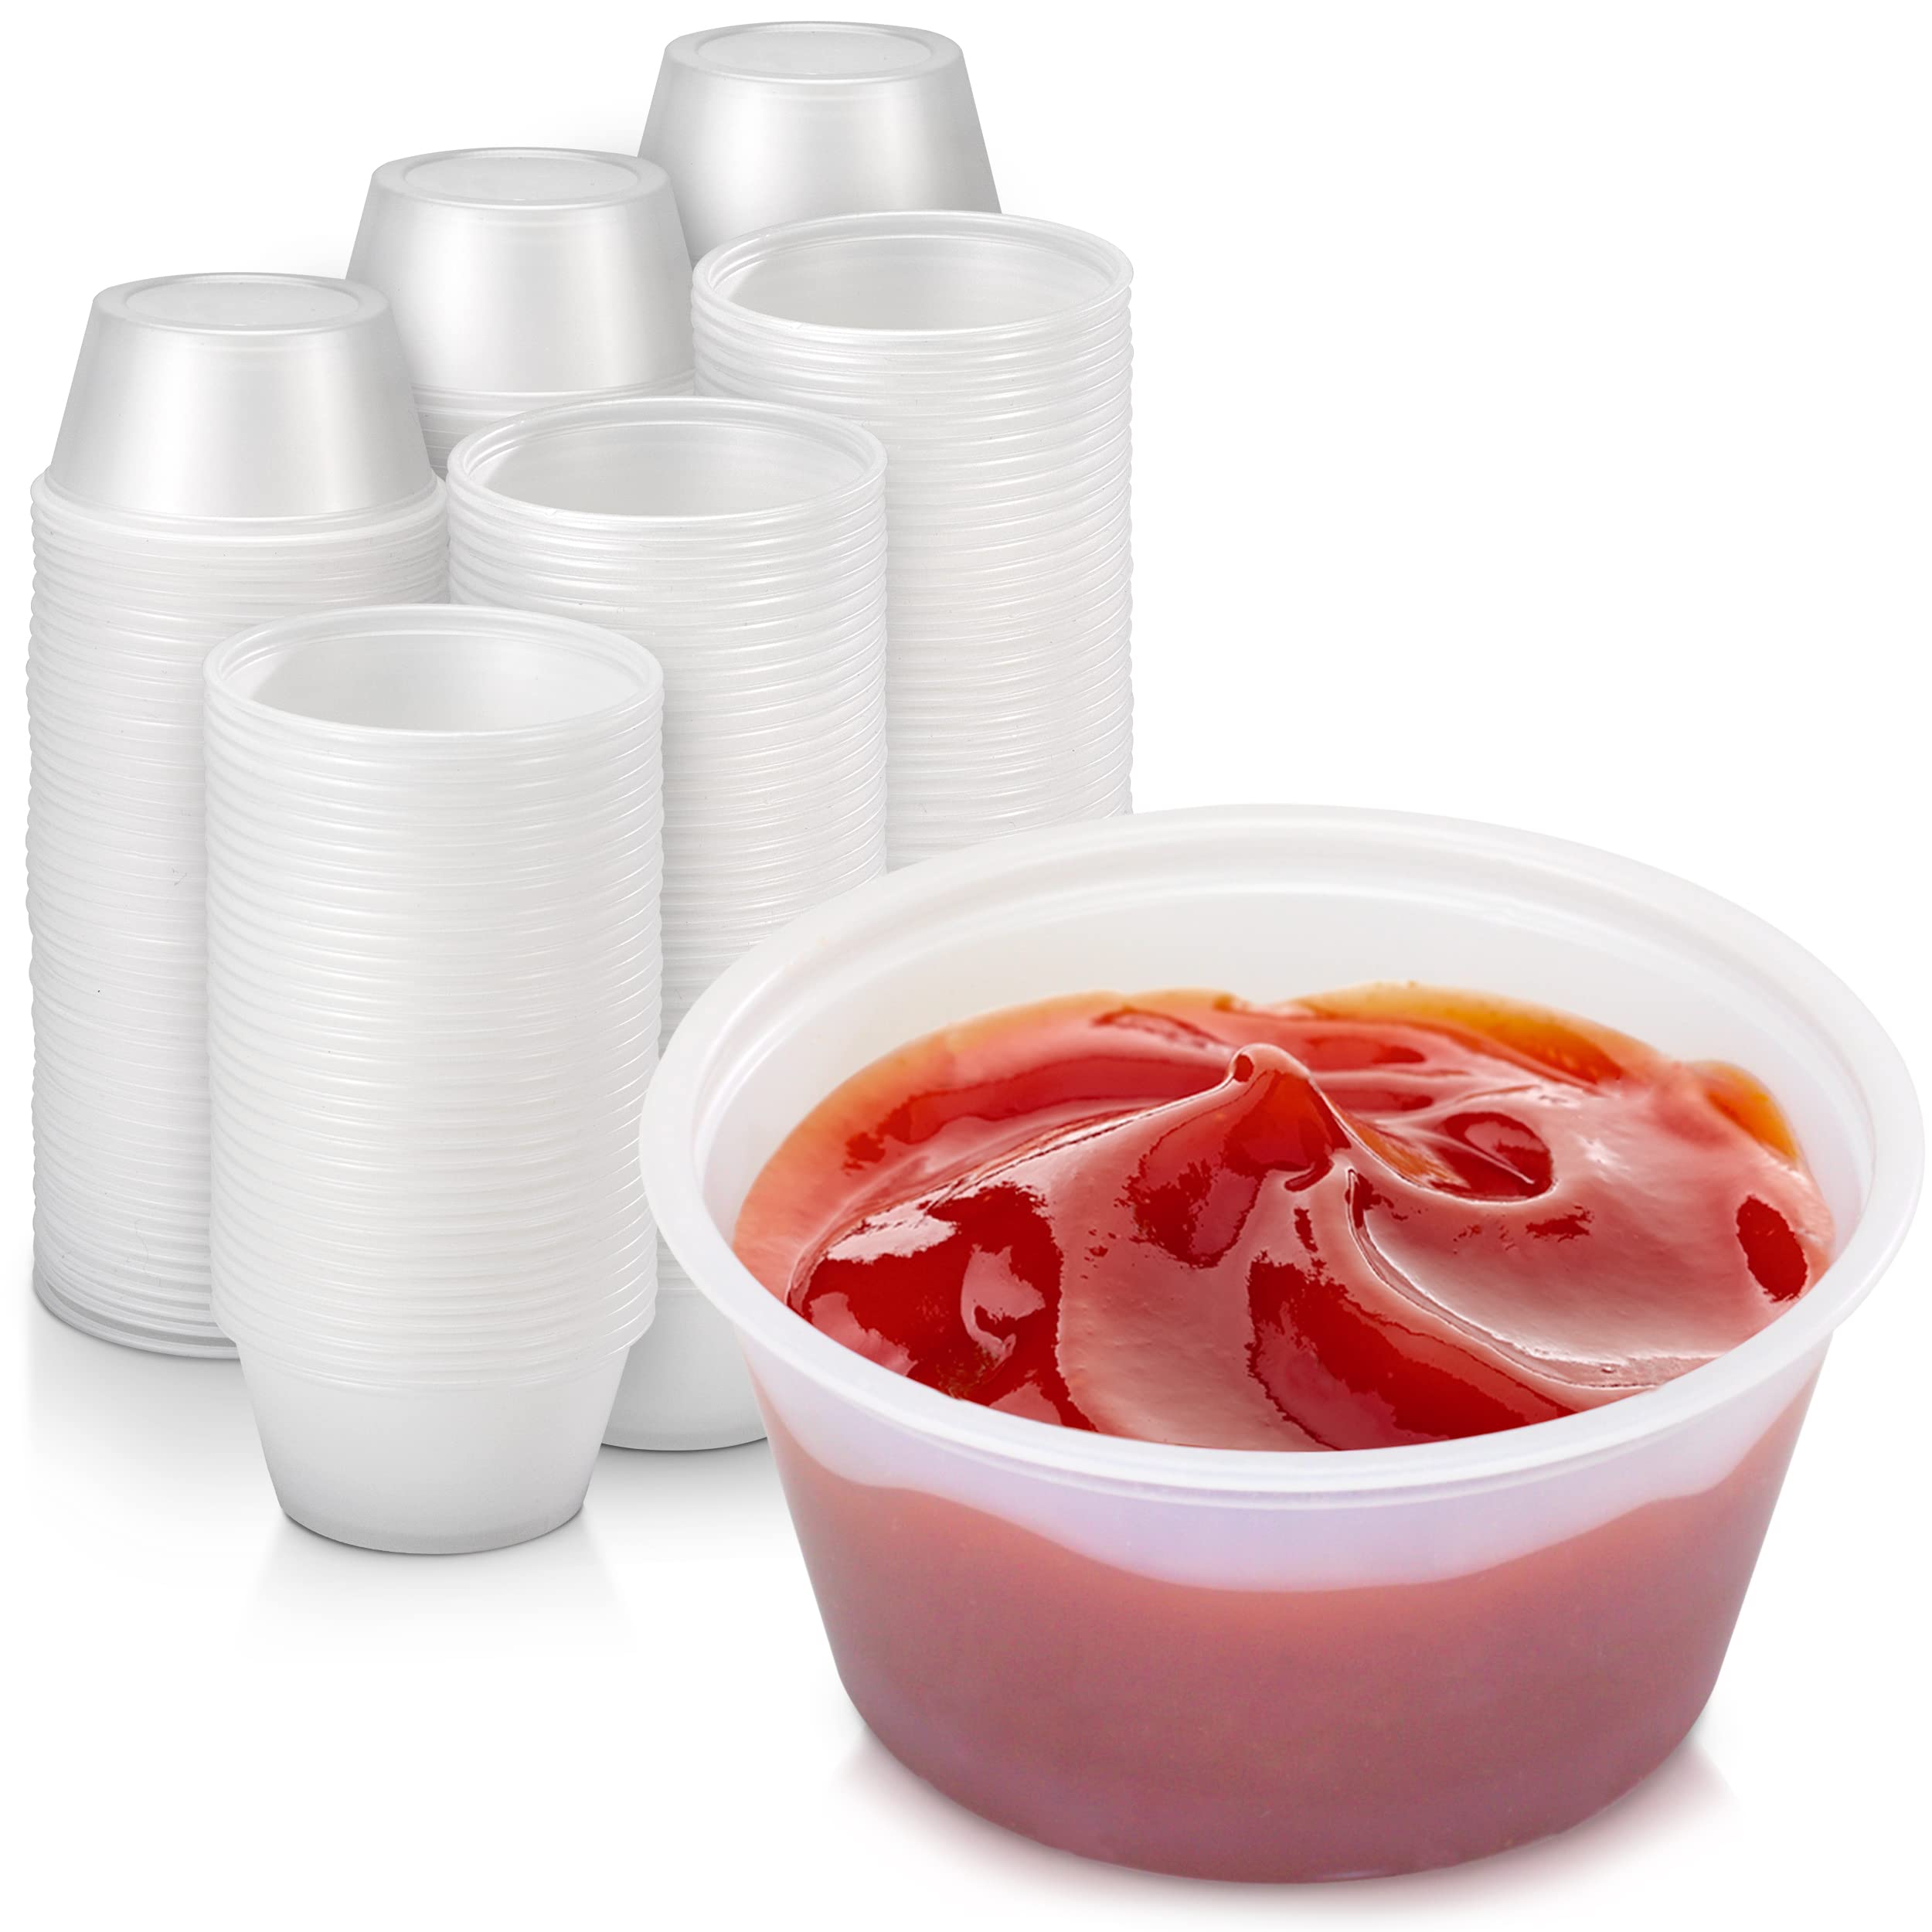 250 Pack] 1 oz Portion Cups with Lids- Small Condiment Containers